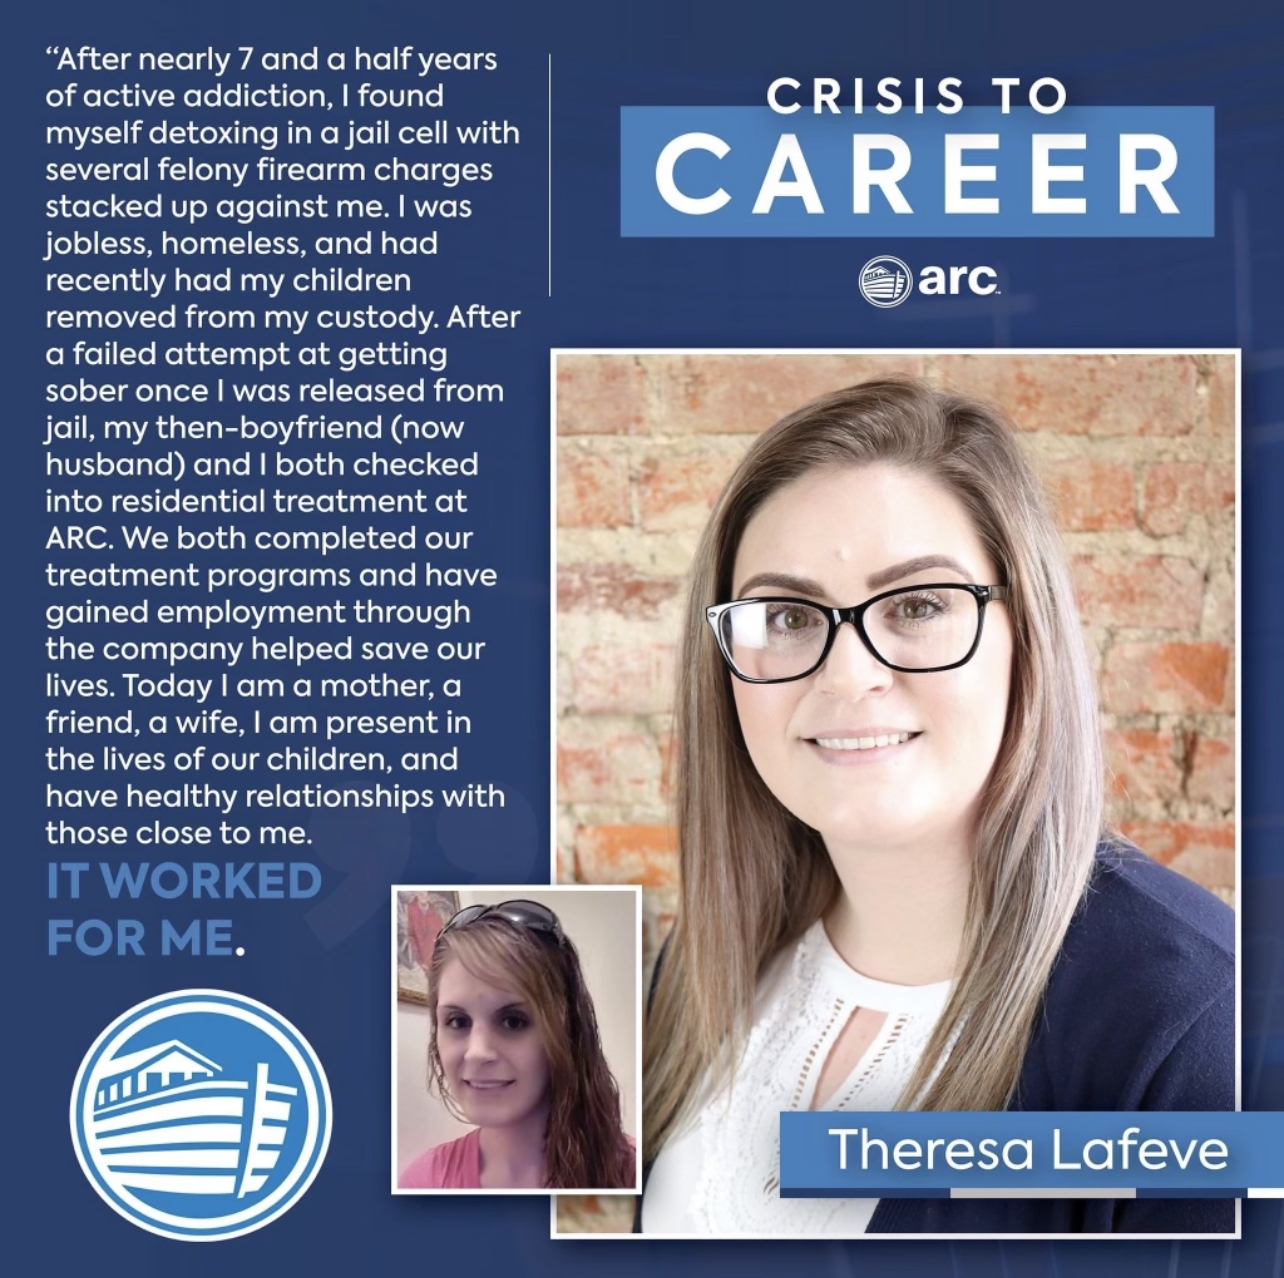 Theresa LaFeve is a beautiful example of our Crisis to Career model in full effect. 